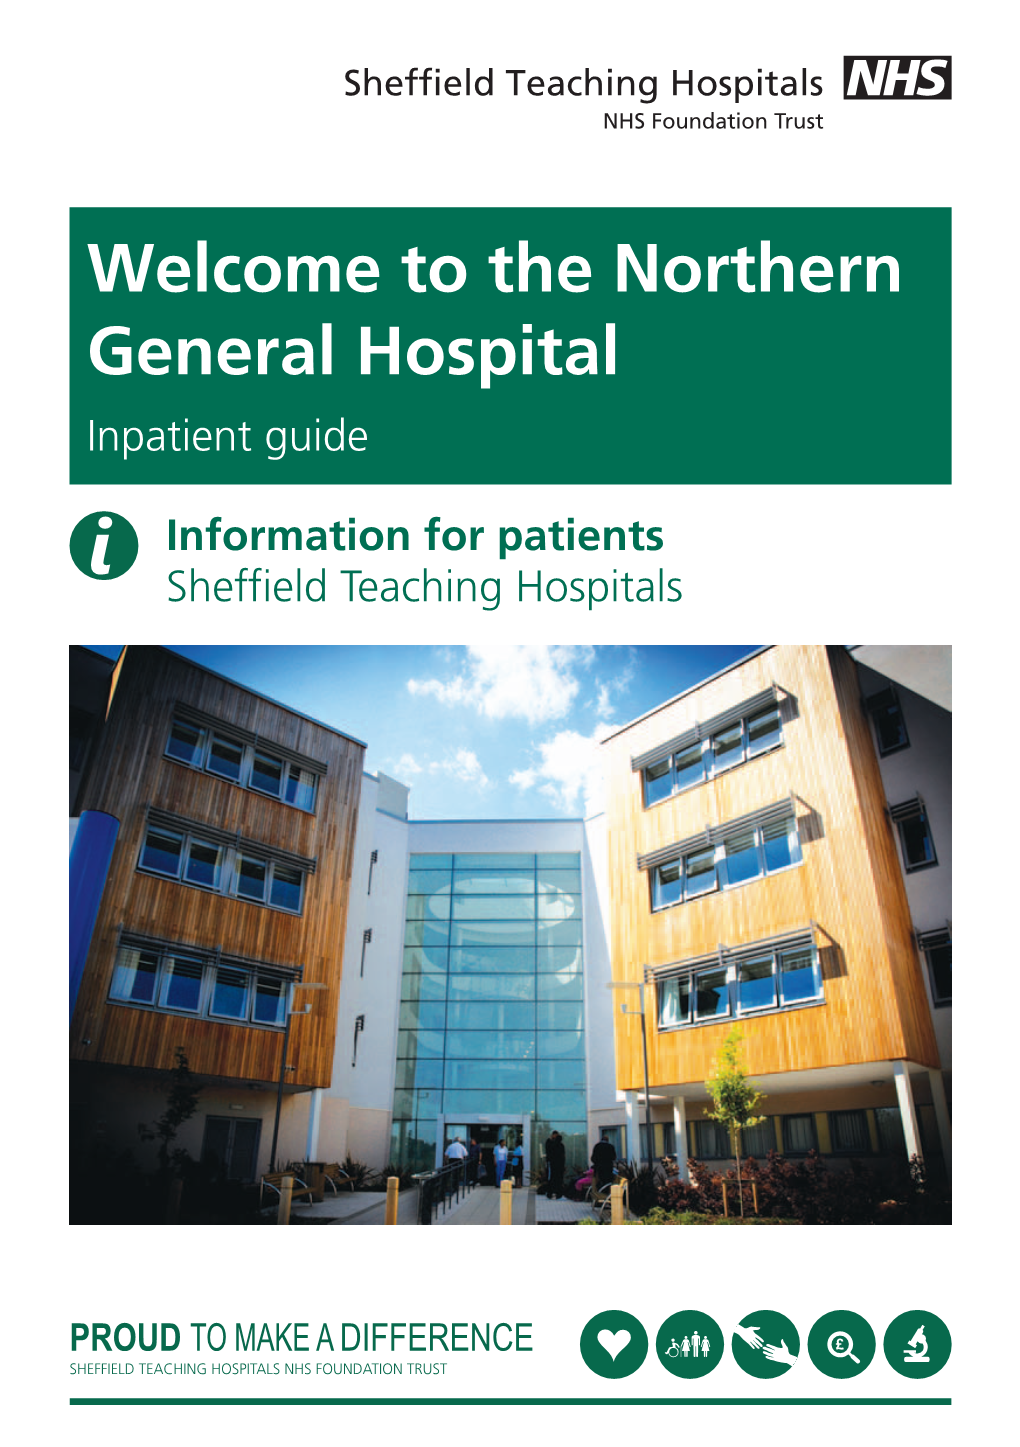 Welcome to the Northern General Hospital Inpatient Guide